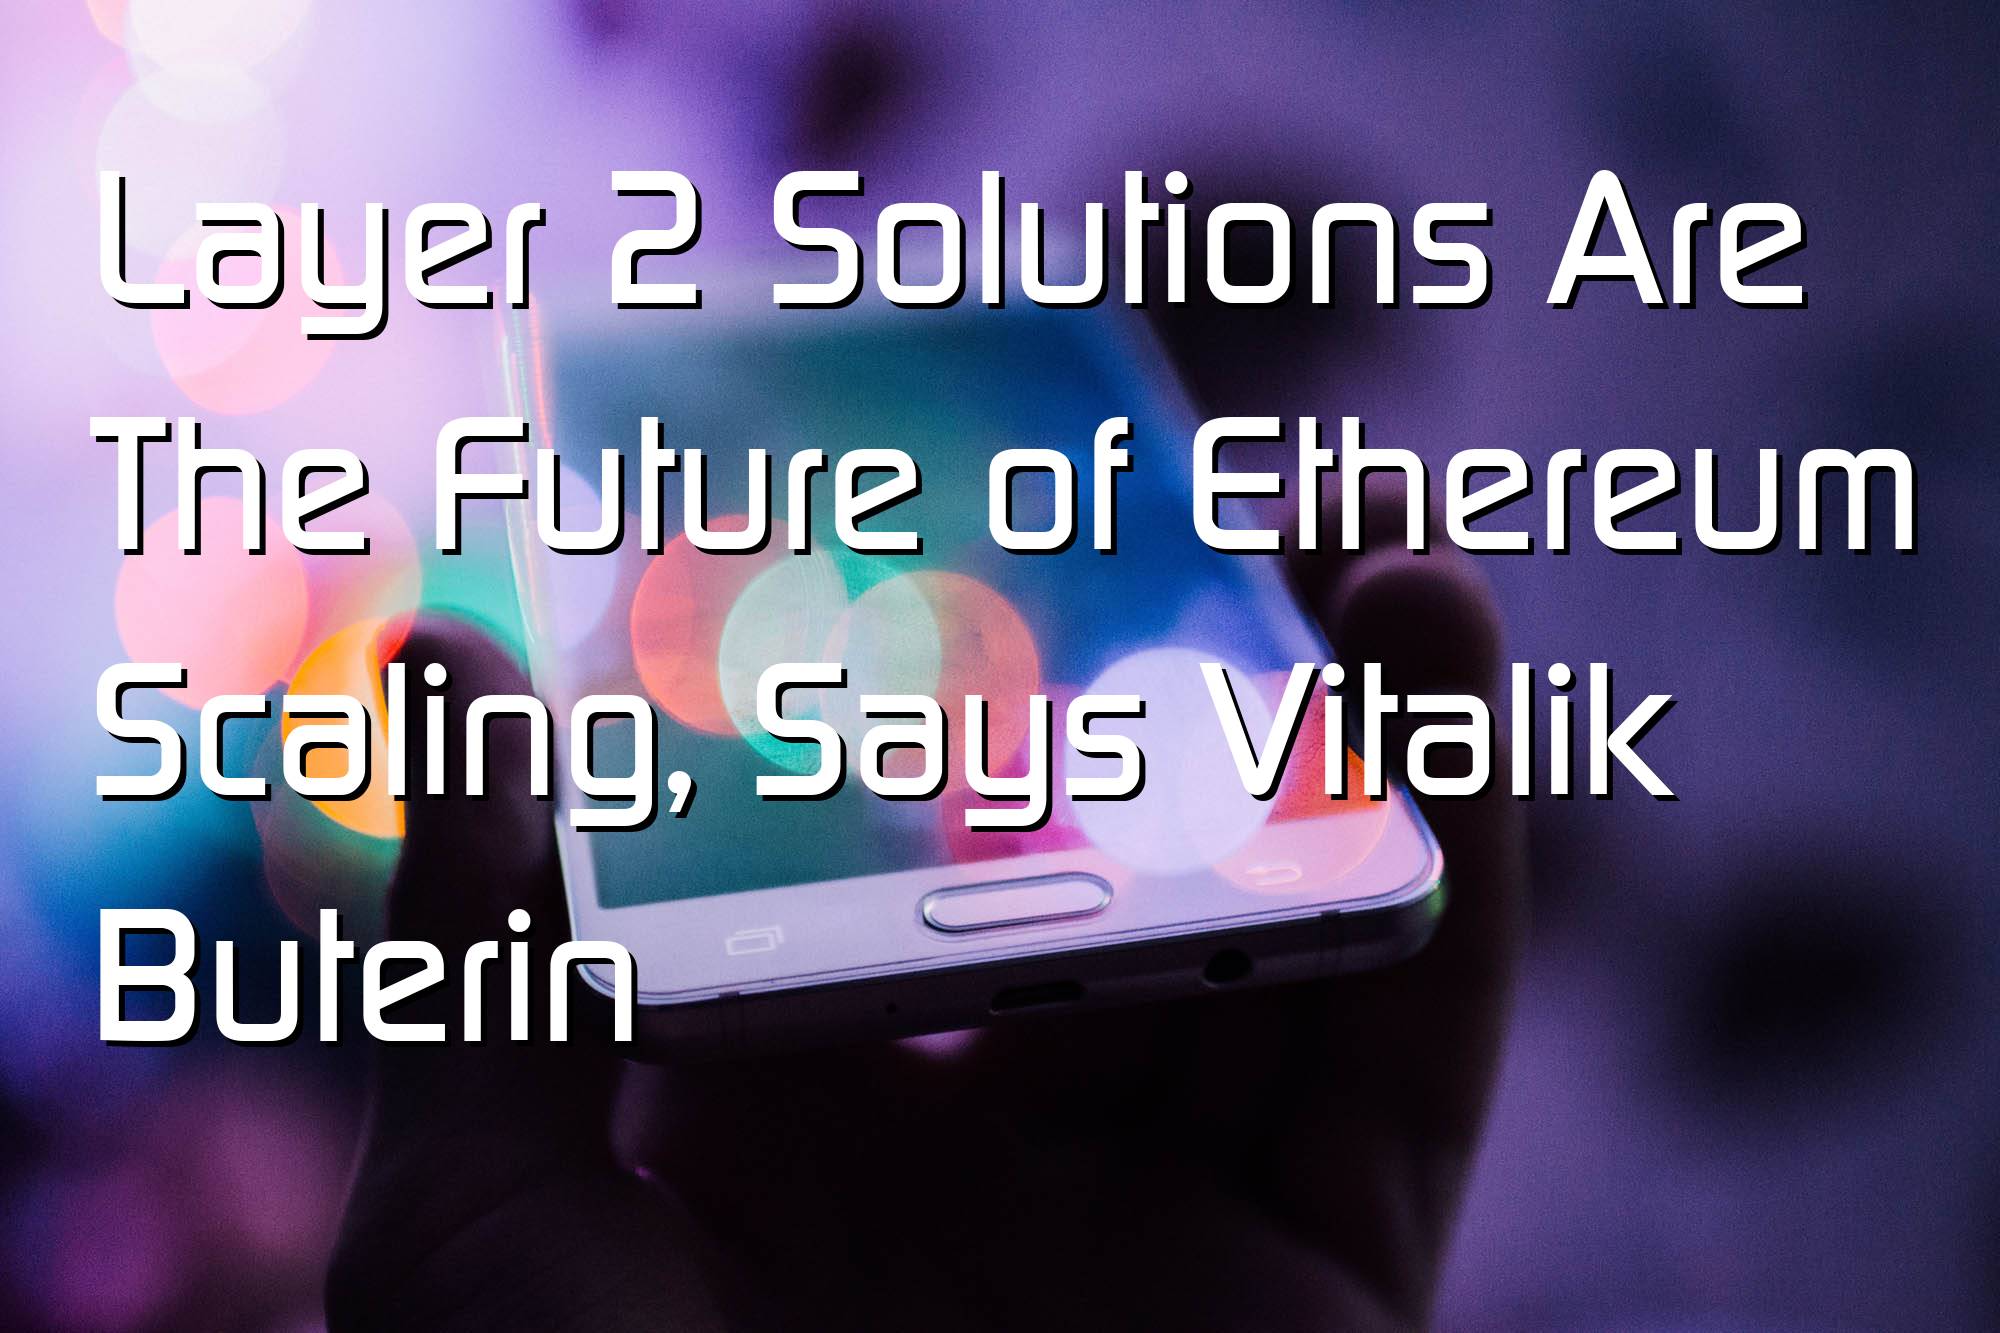 @$61926: Layer 2 Solutions Are The Future of Ethereum Scaling, Says Vitalik Buterin